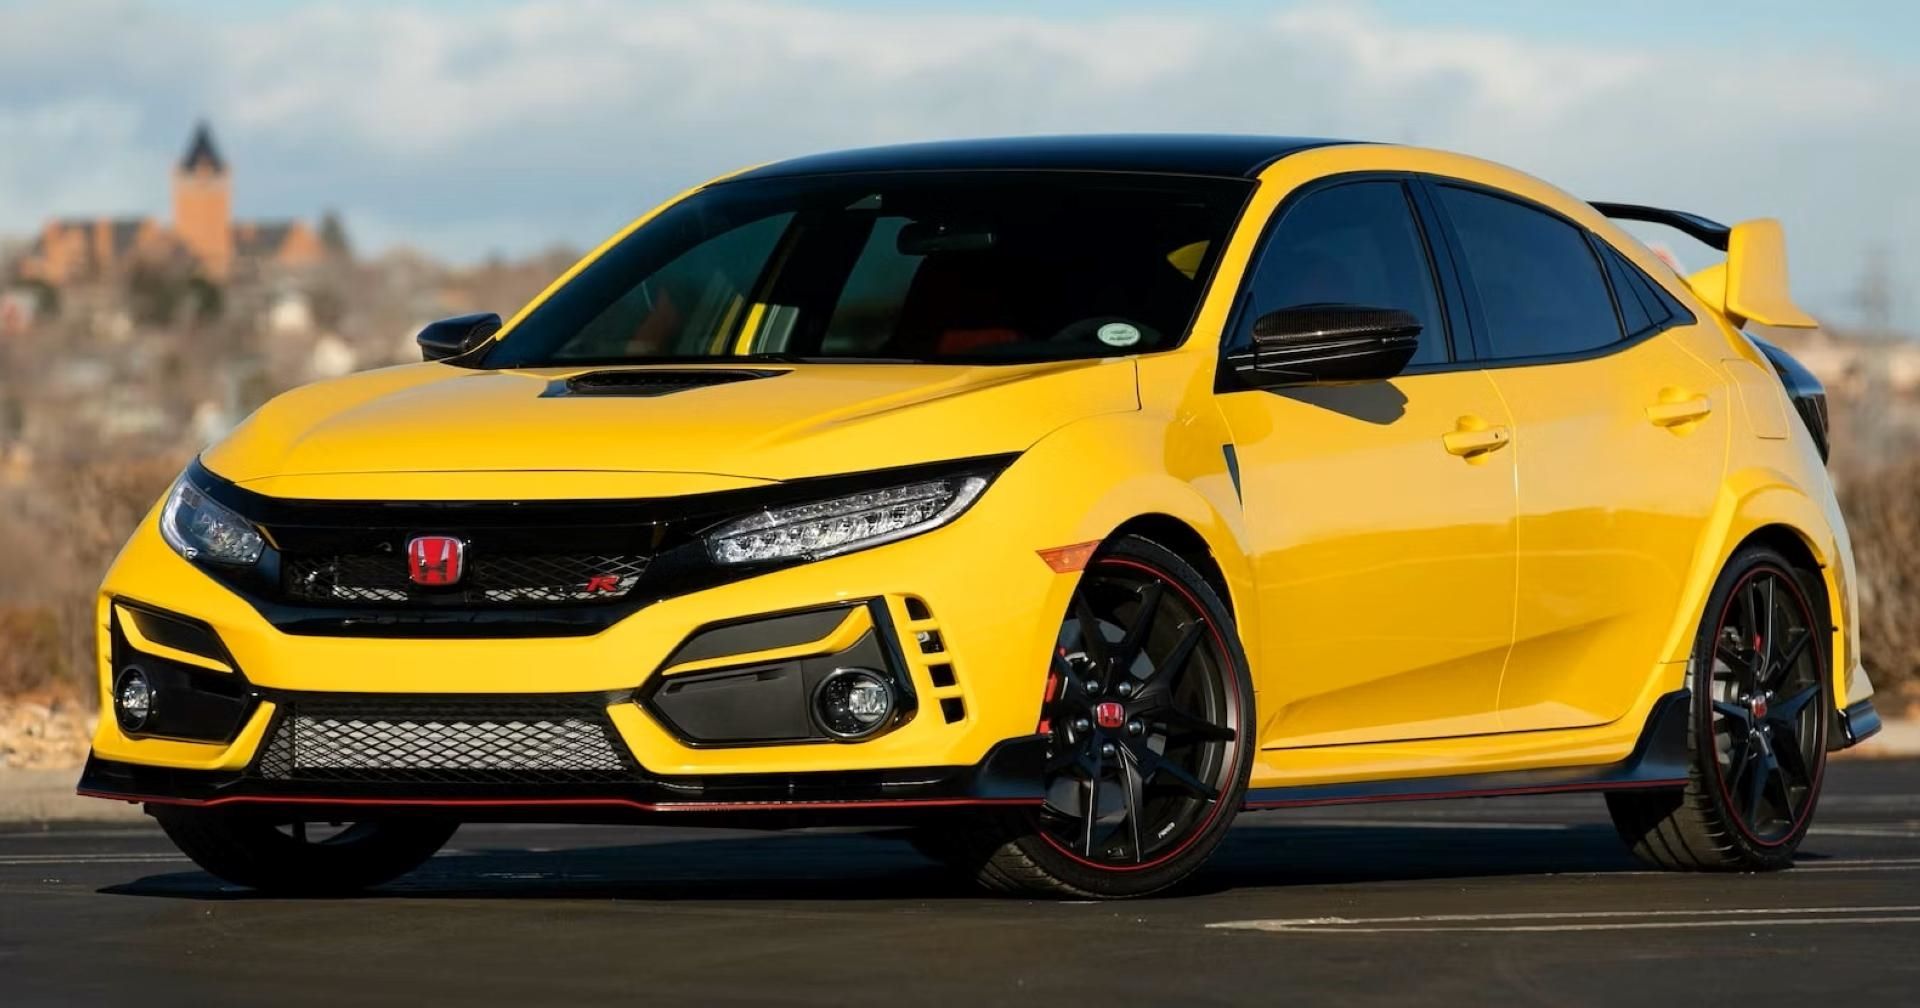 2021 Honda Civic Type R Limited Edition - Front Quarter